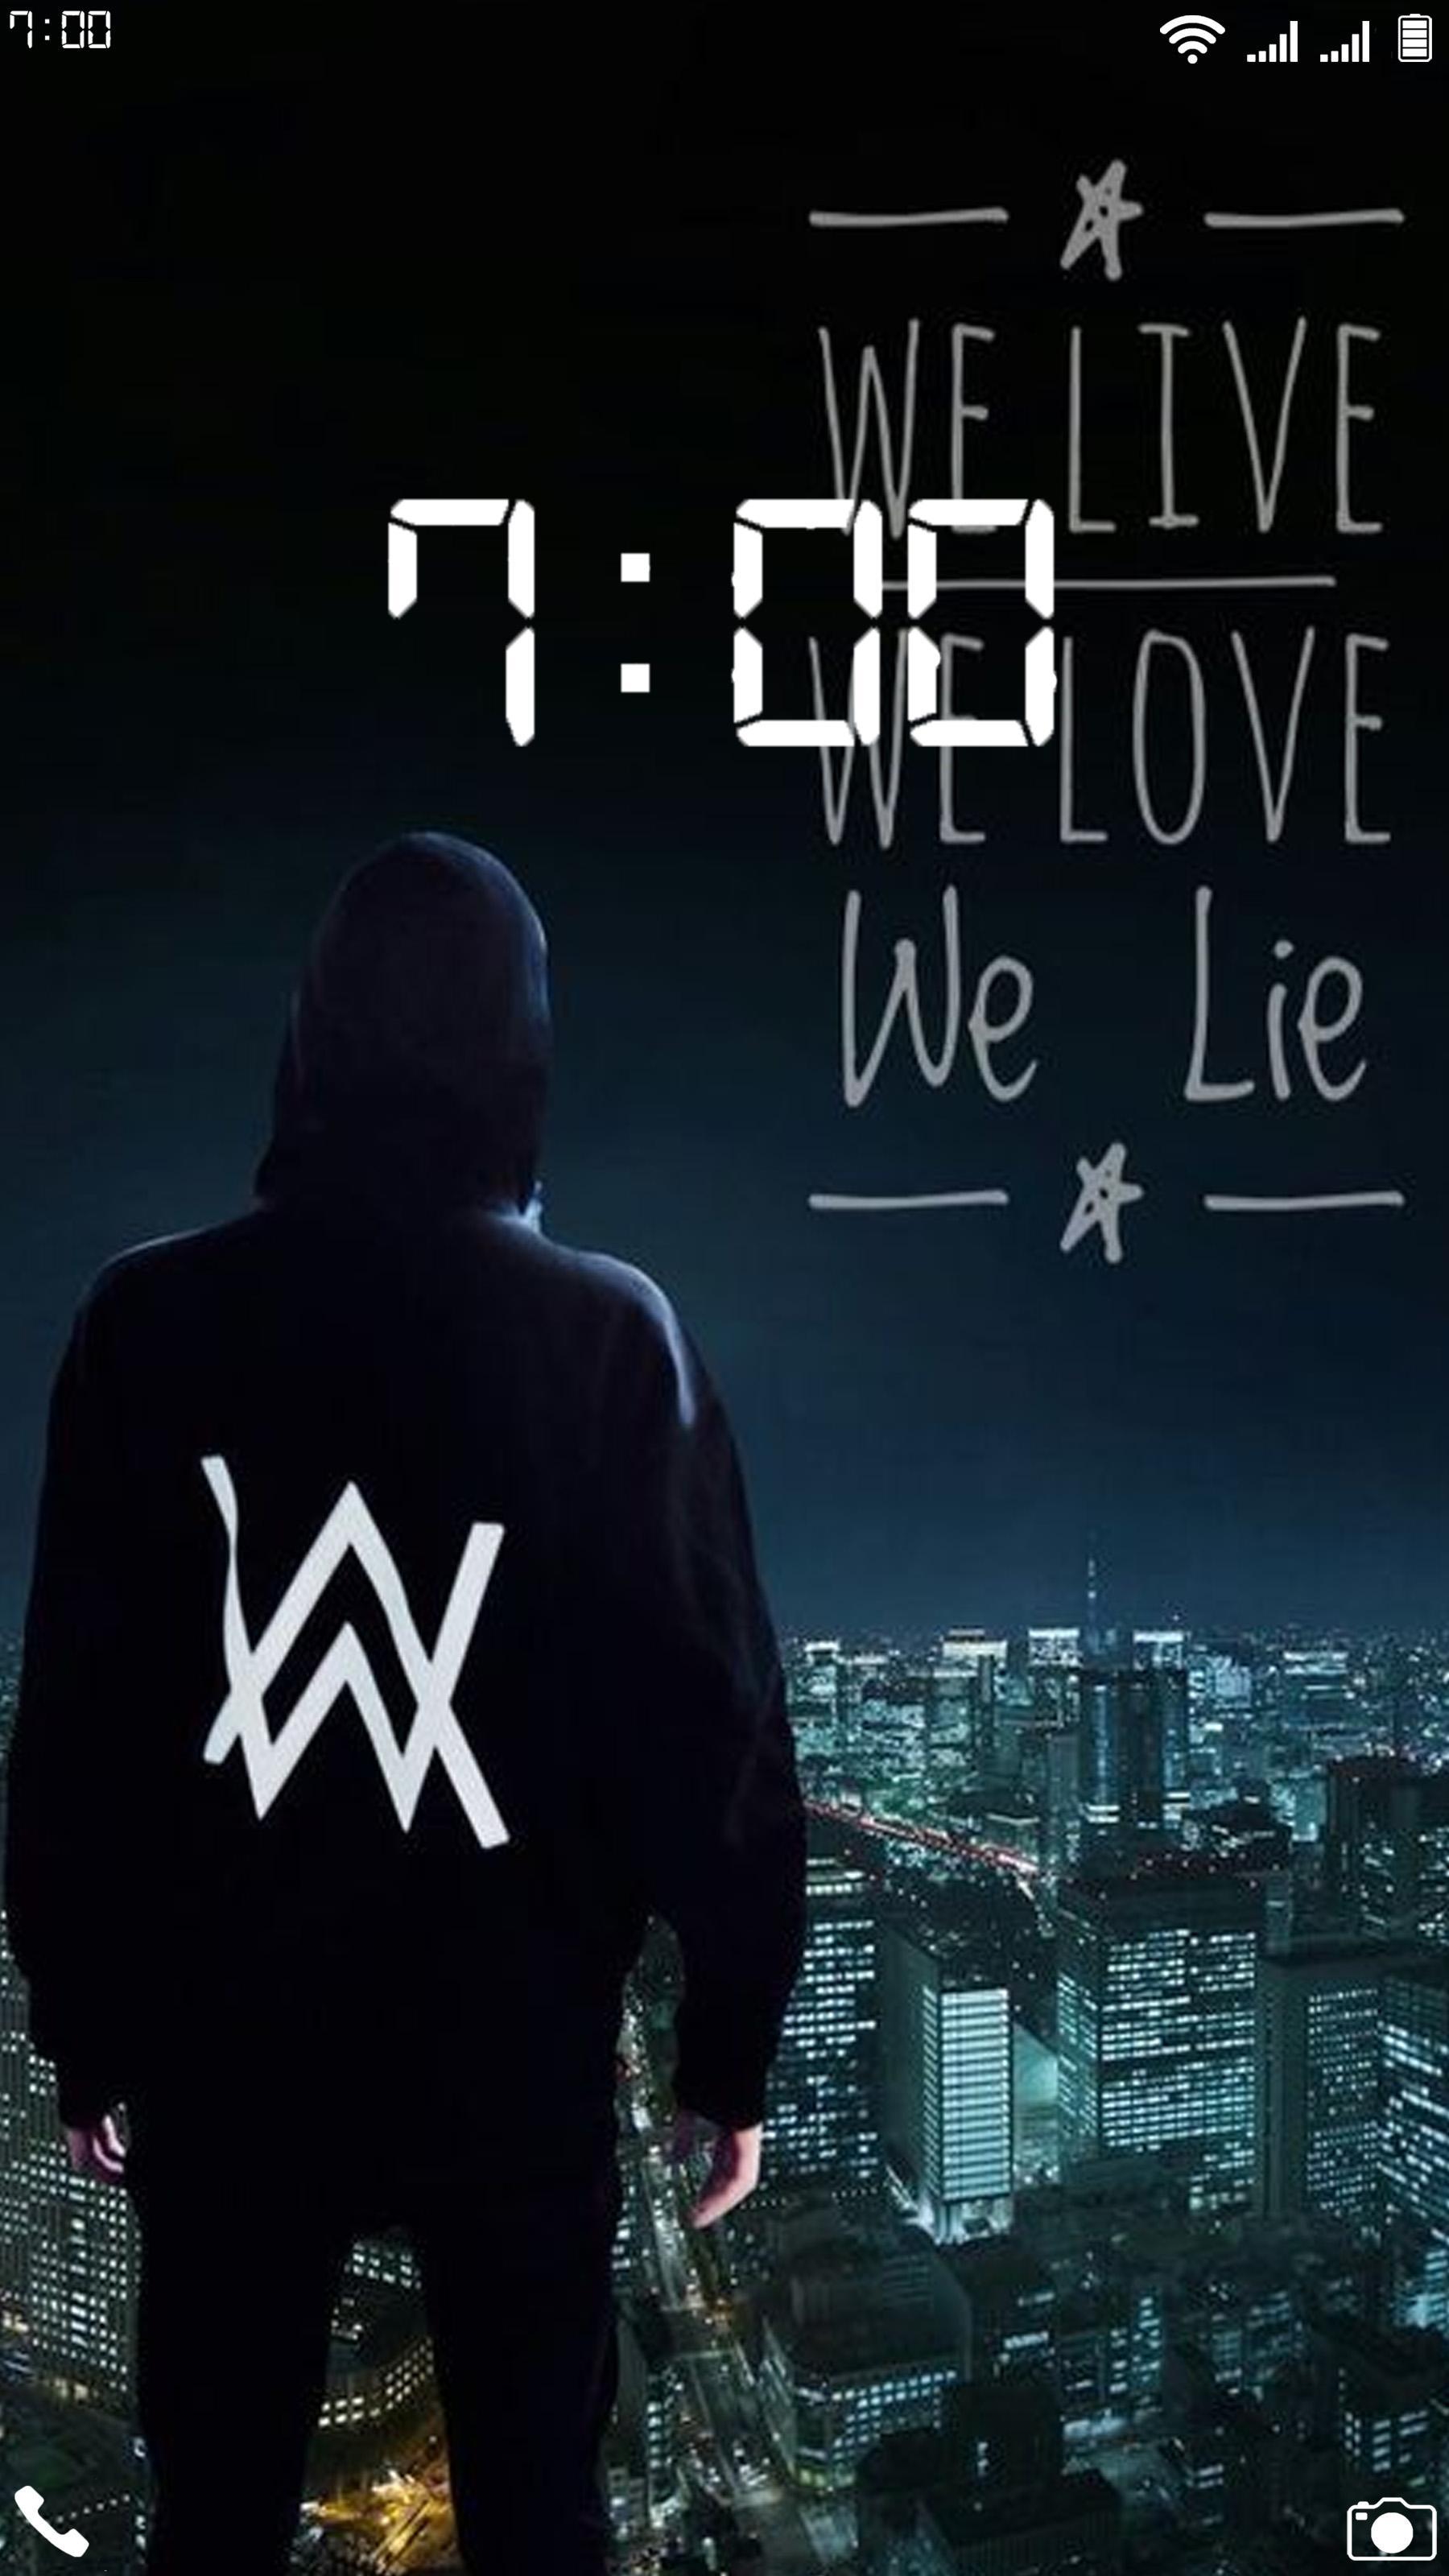 alan walker wallpaper android,font,album cover,darkness,outerwear,photography